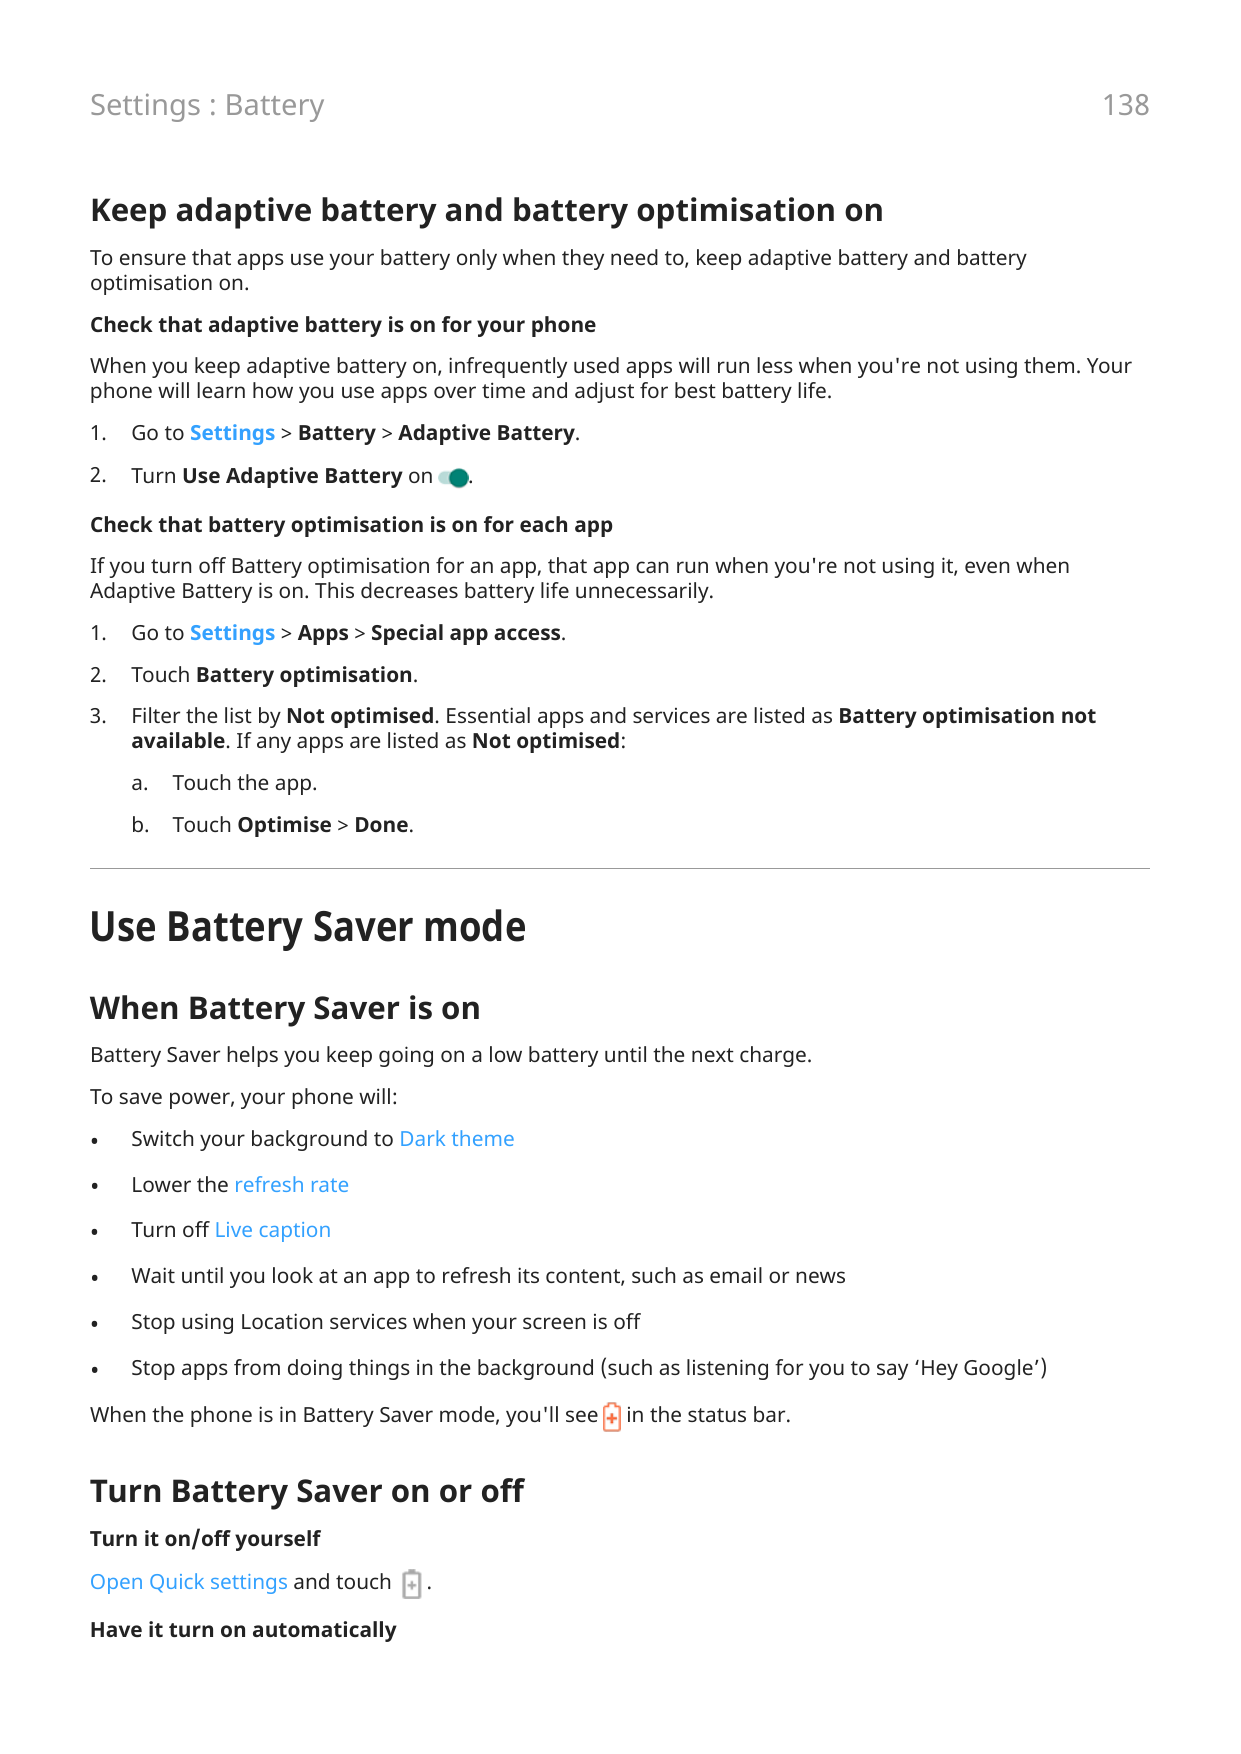 138Settings : BatteryKeep adaptive battery and battery optimisation onTo ensure that apps use your battery only when they need t